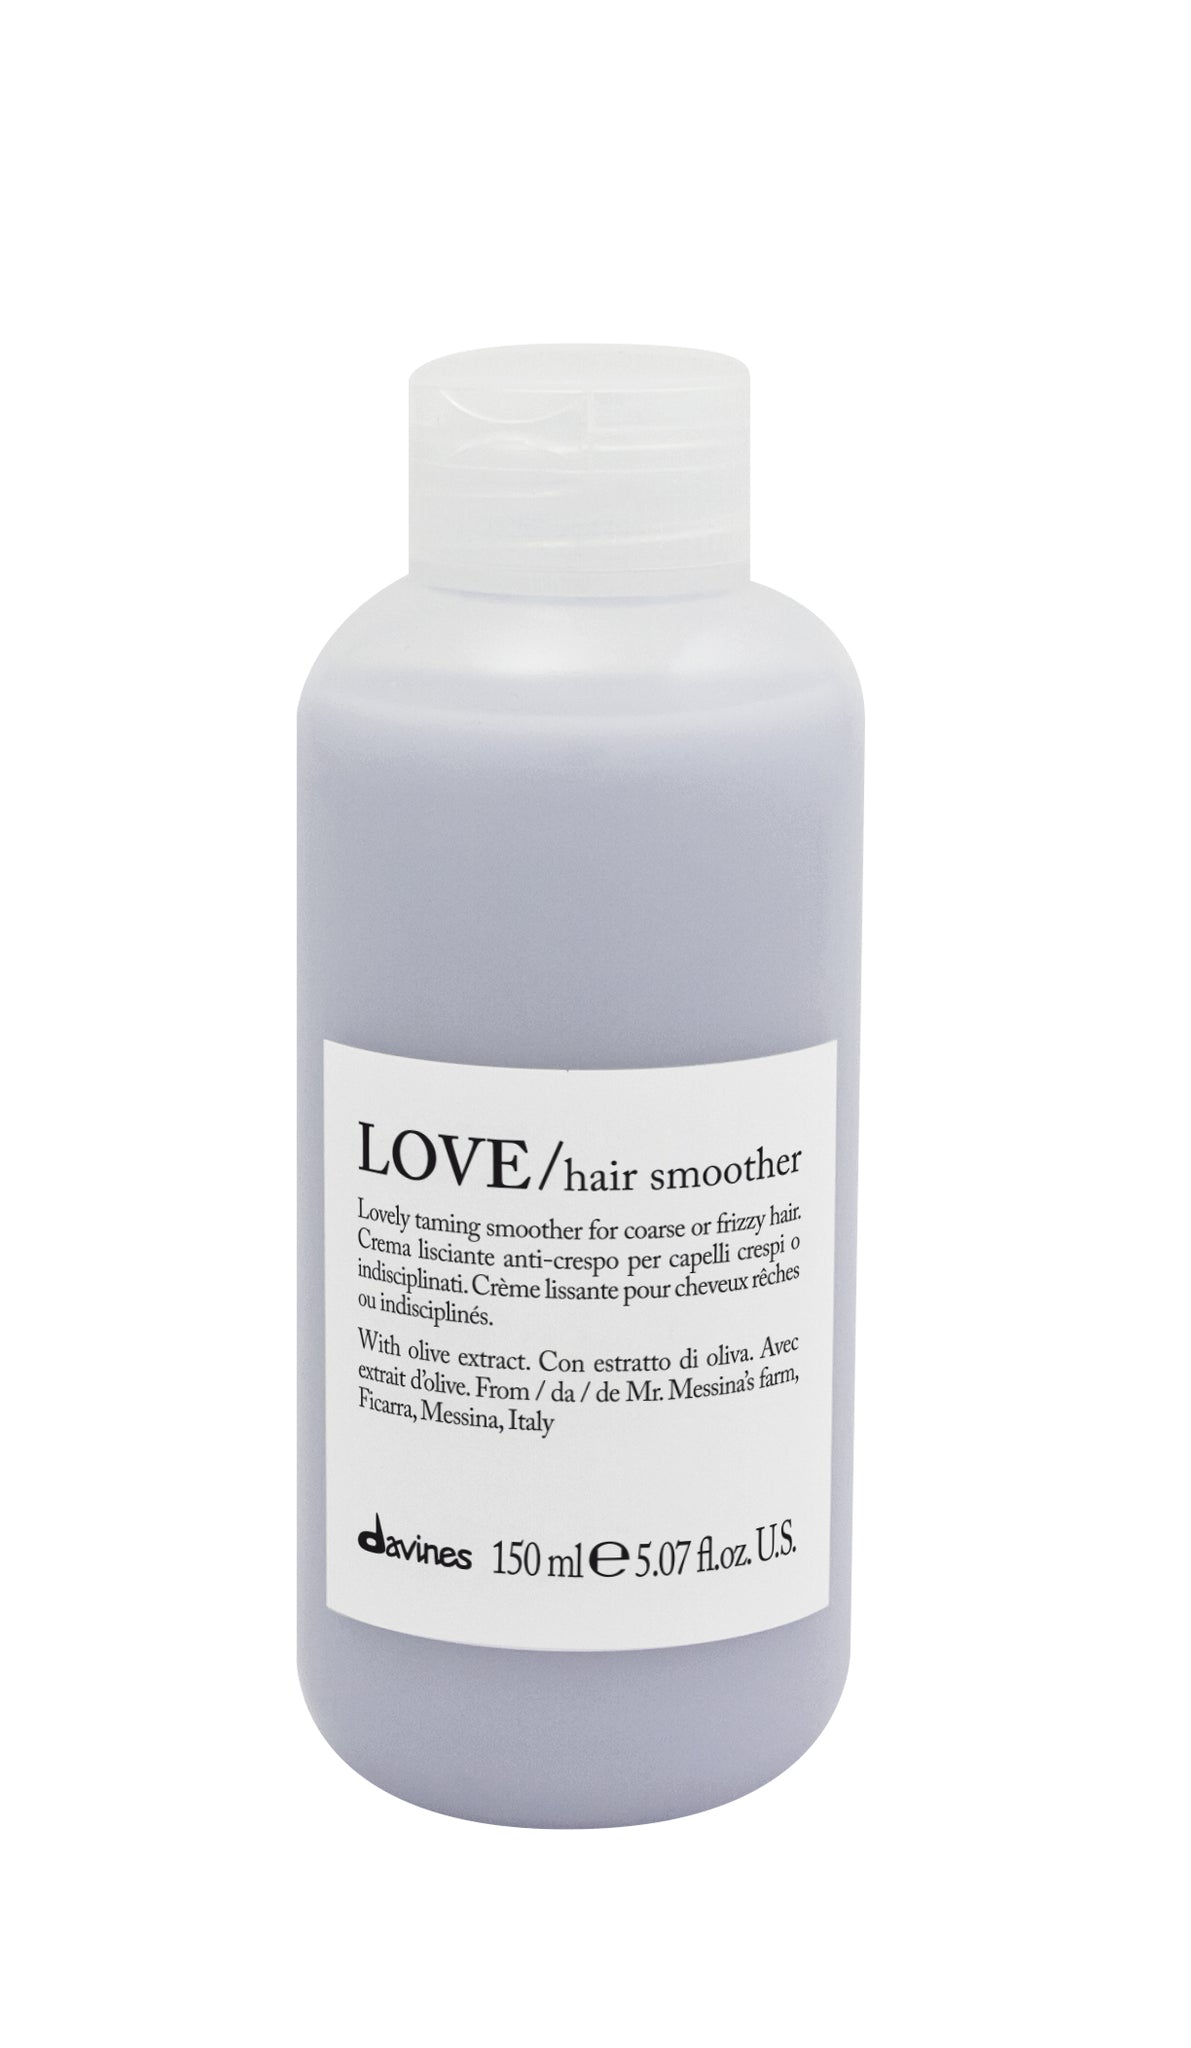 Love smoothing-Hair Smoother